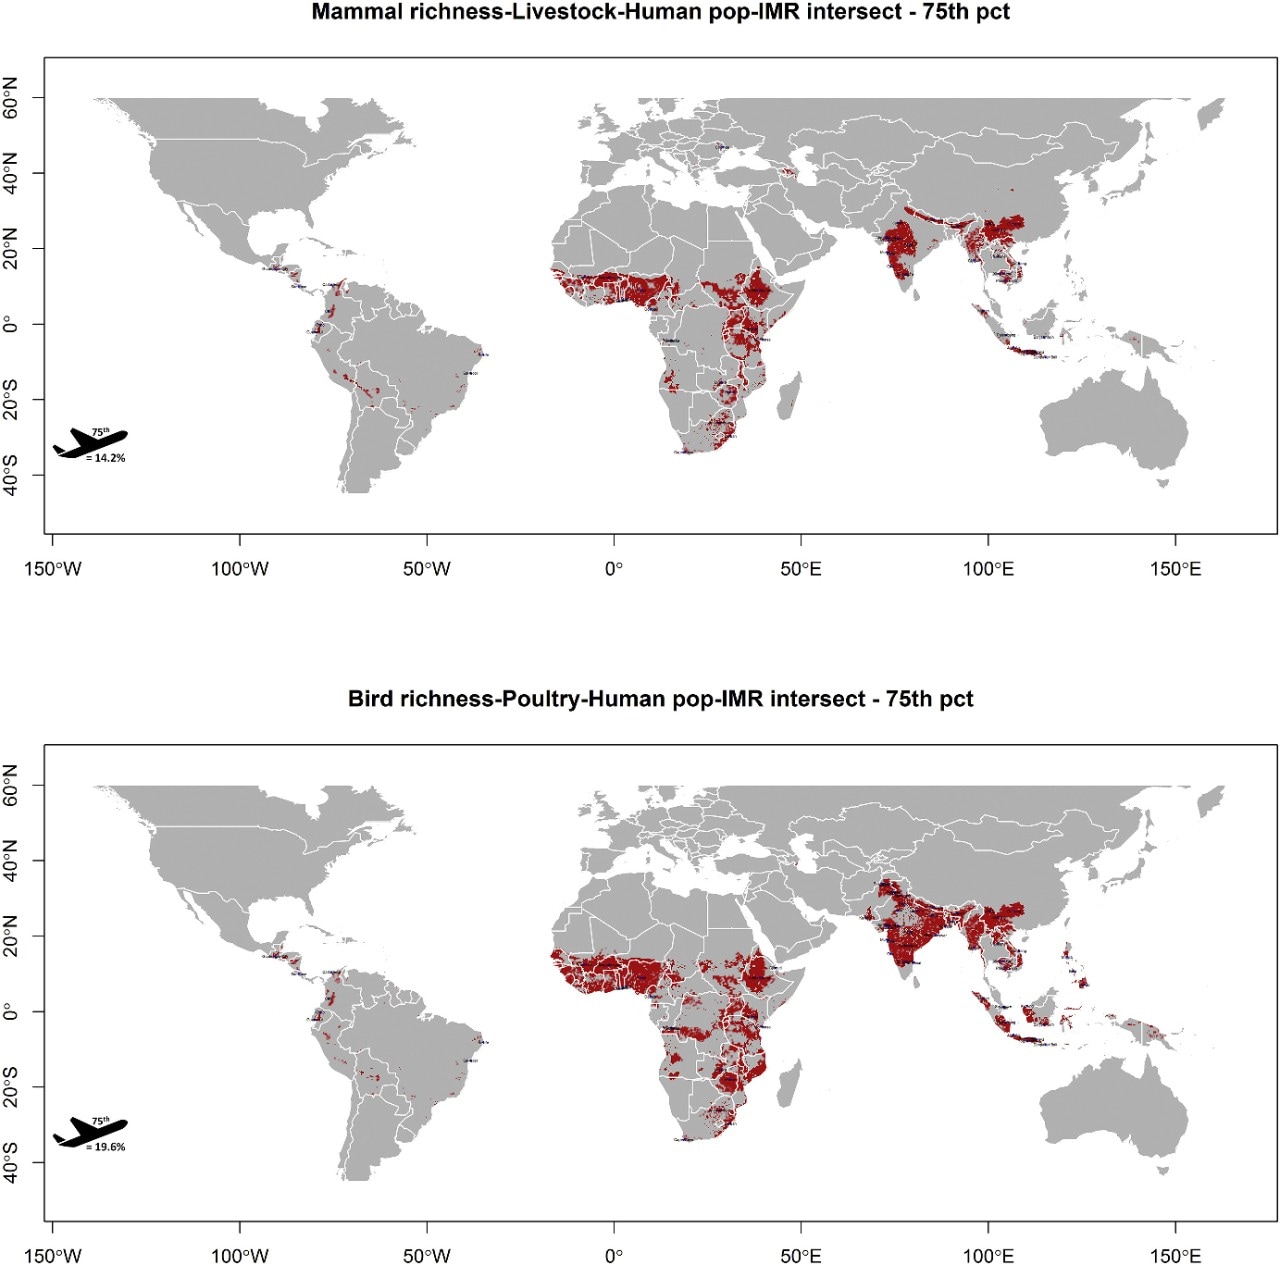 'Red-alert' zones from the paper led by the University of Sydney quantifying the global geography of wildlife-human interfaces. The interface zones of highest potential spillover impact, and their adjacent cities, are predominantly in sub-Saharan Africa and South and Southeast Asia.